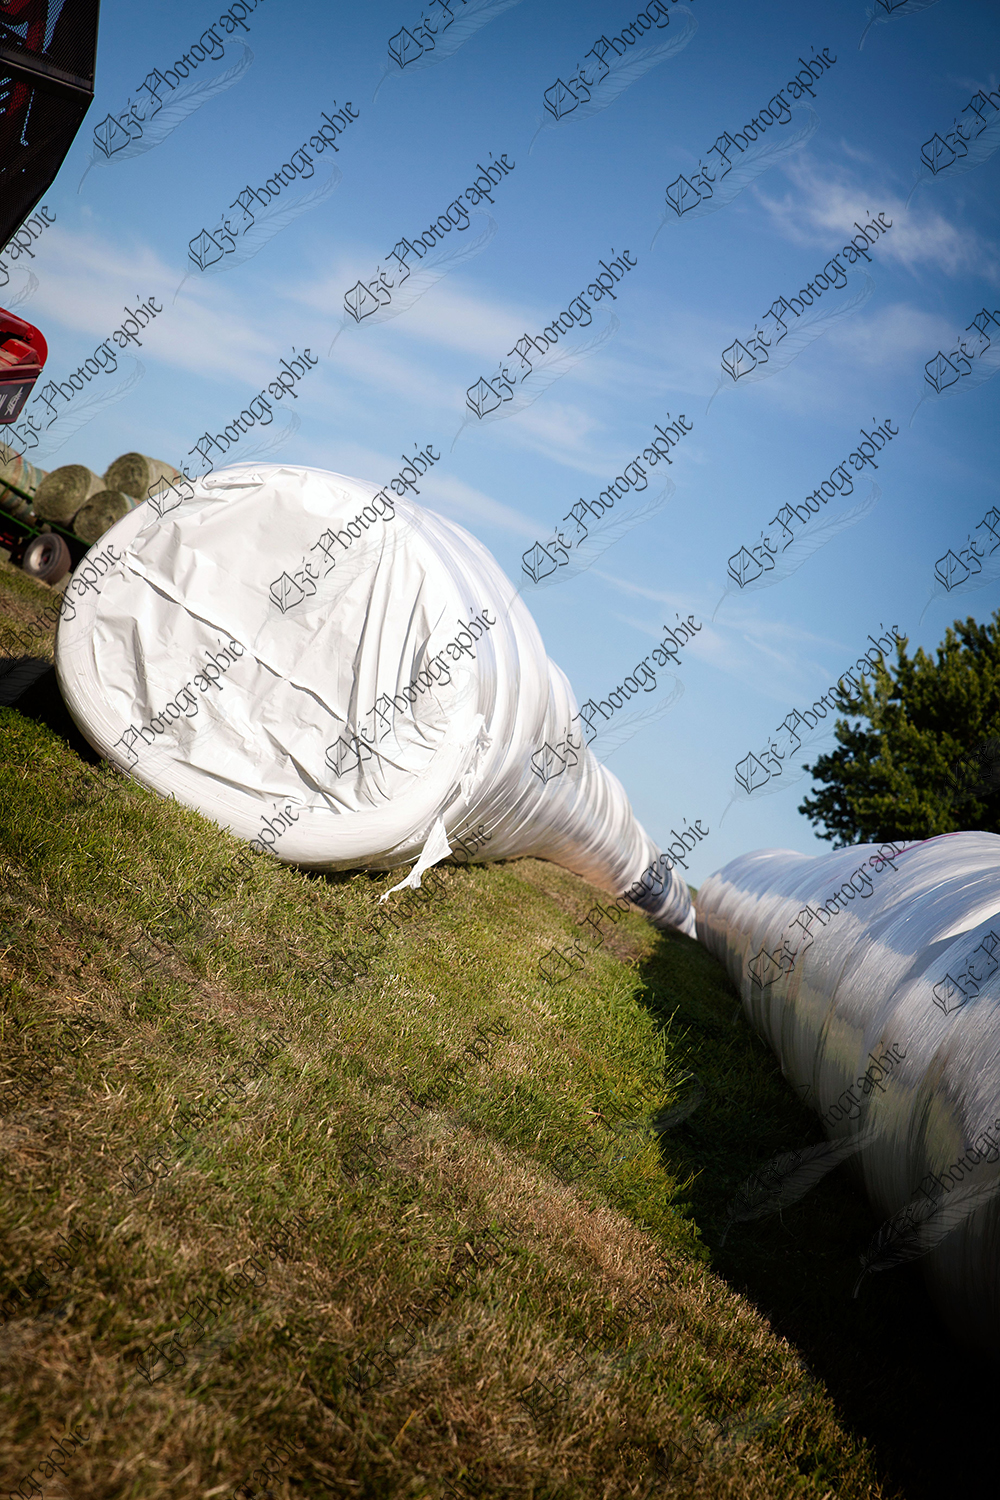 elze_photo_9349_champ_entreposer_foin_hay_wrapped_roll